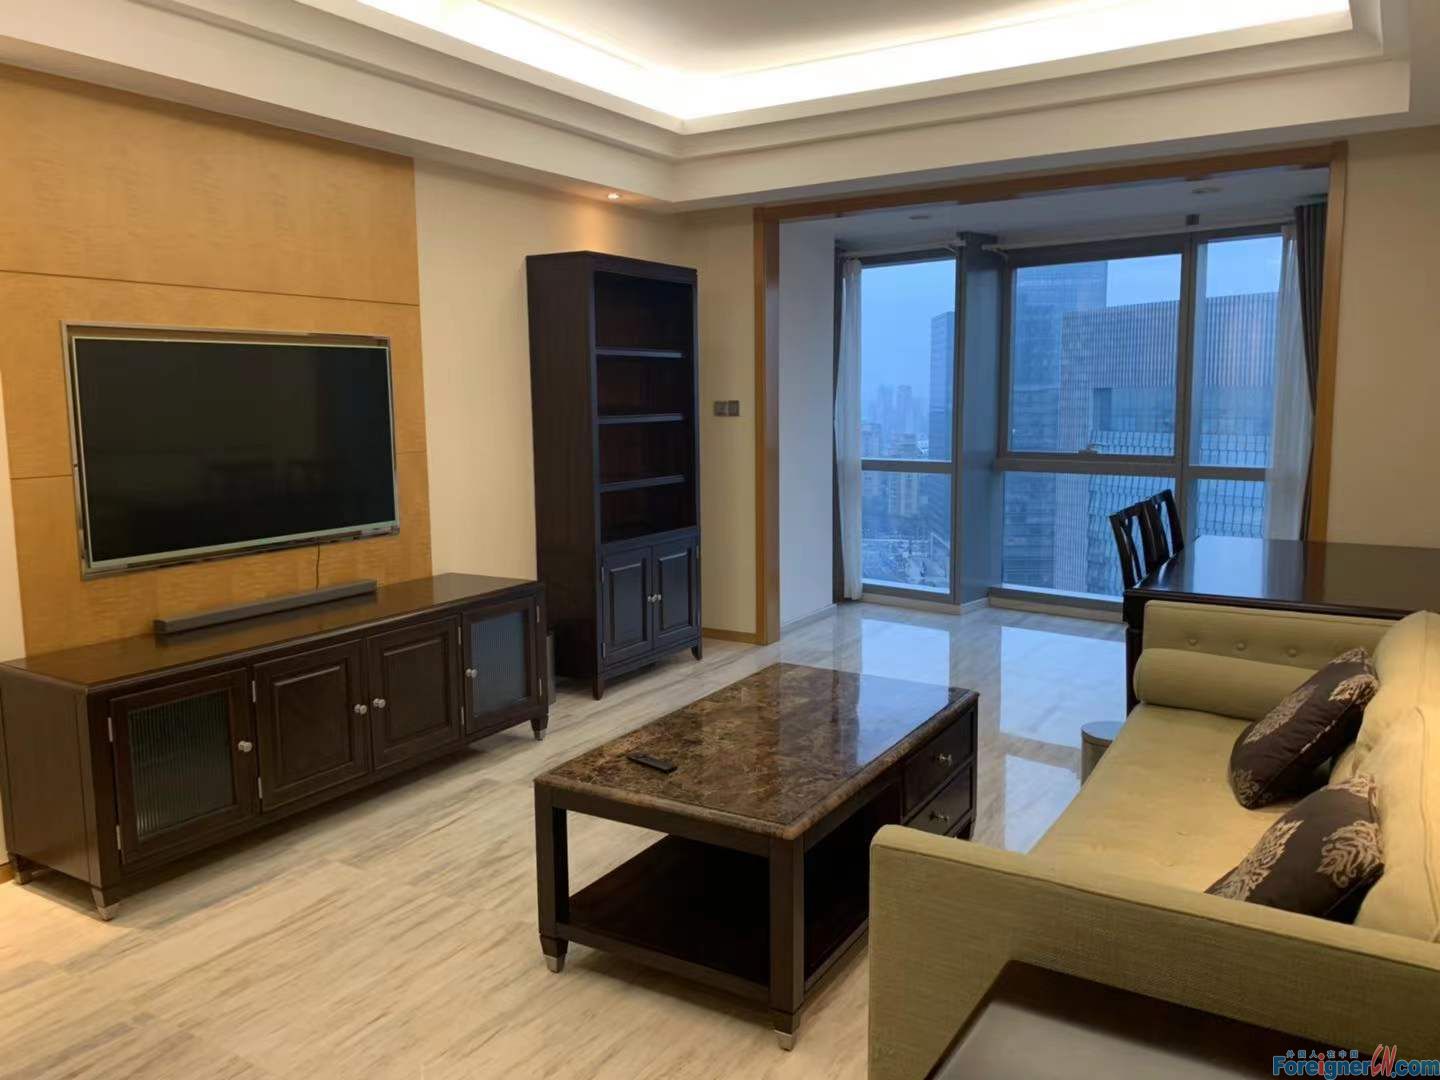 Wow-wow! Hengyu Plaza well-Located near Suzhou center -Convenient life- New furniture,French windows with city-view